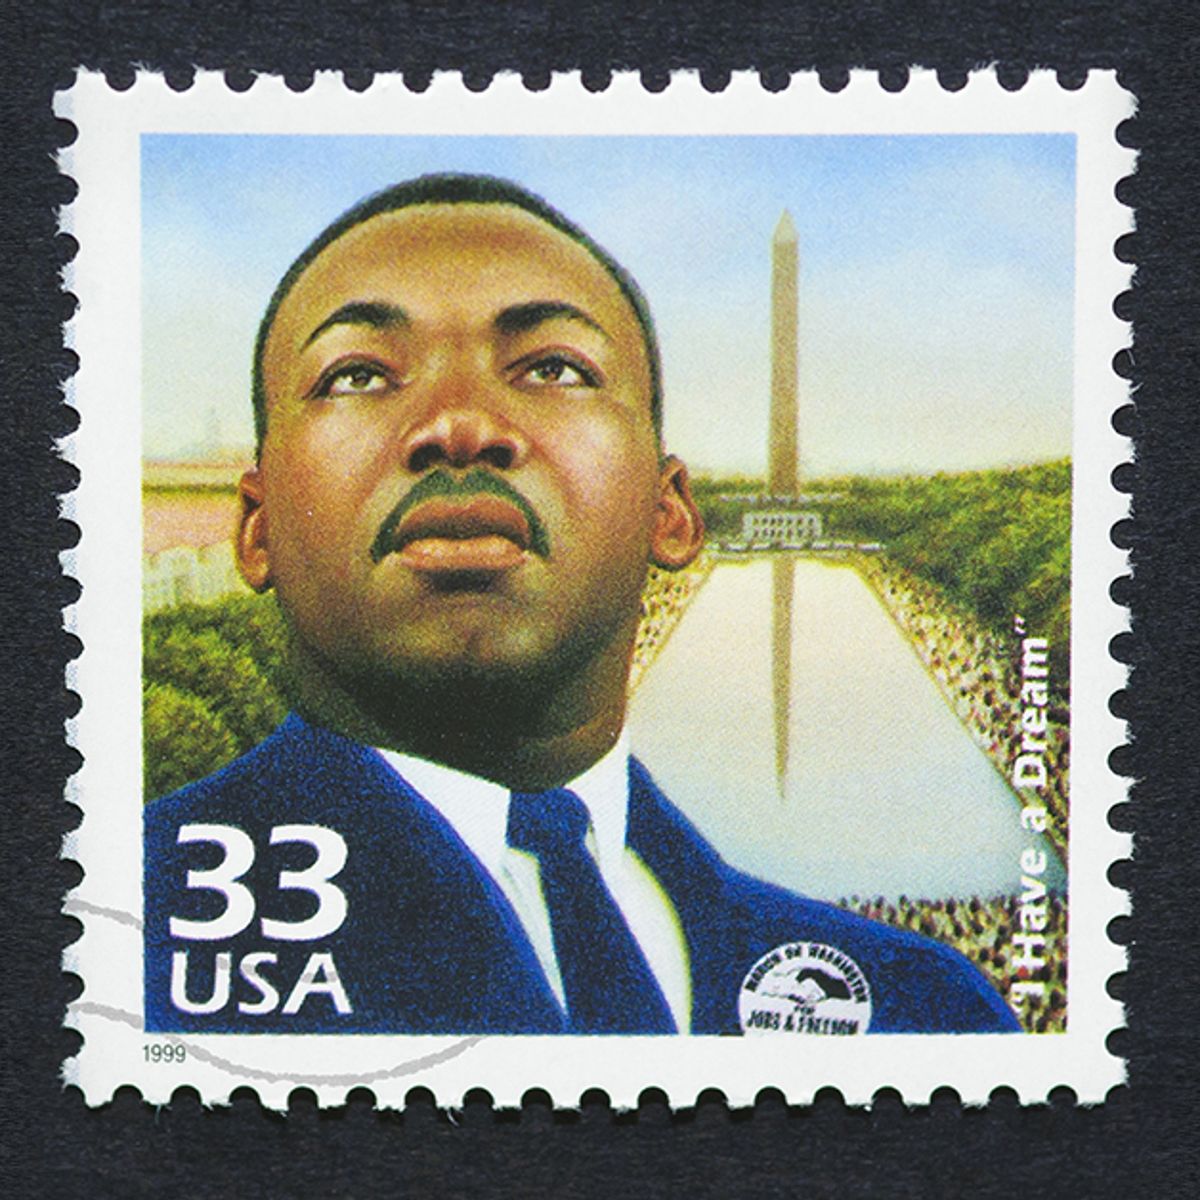 Dr. Martin Luther King Jr. on Worldwide Stamps